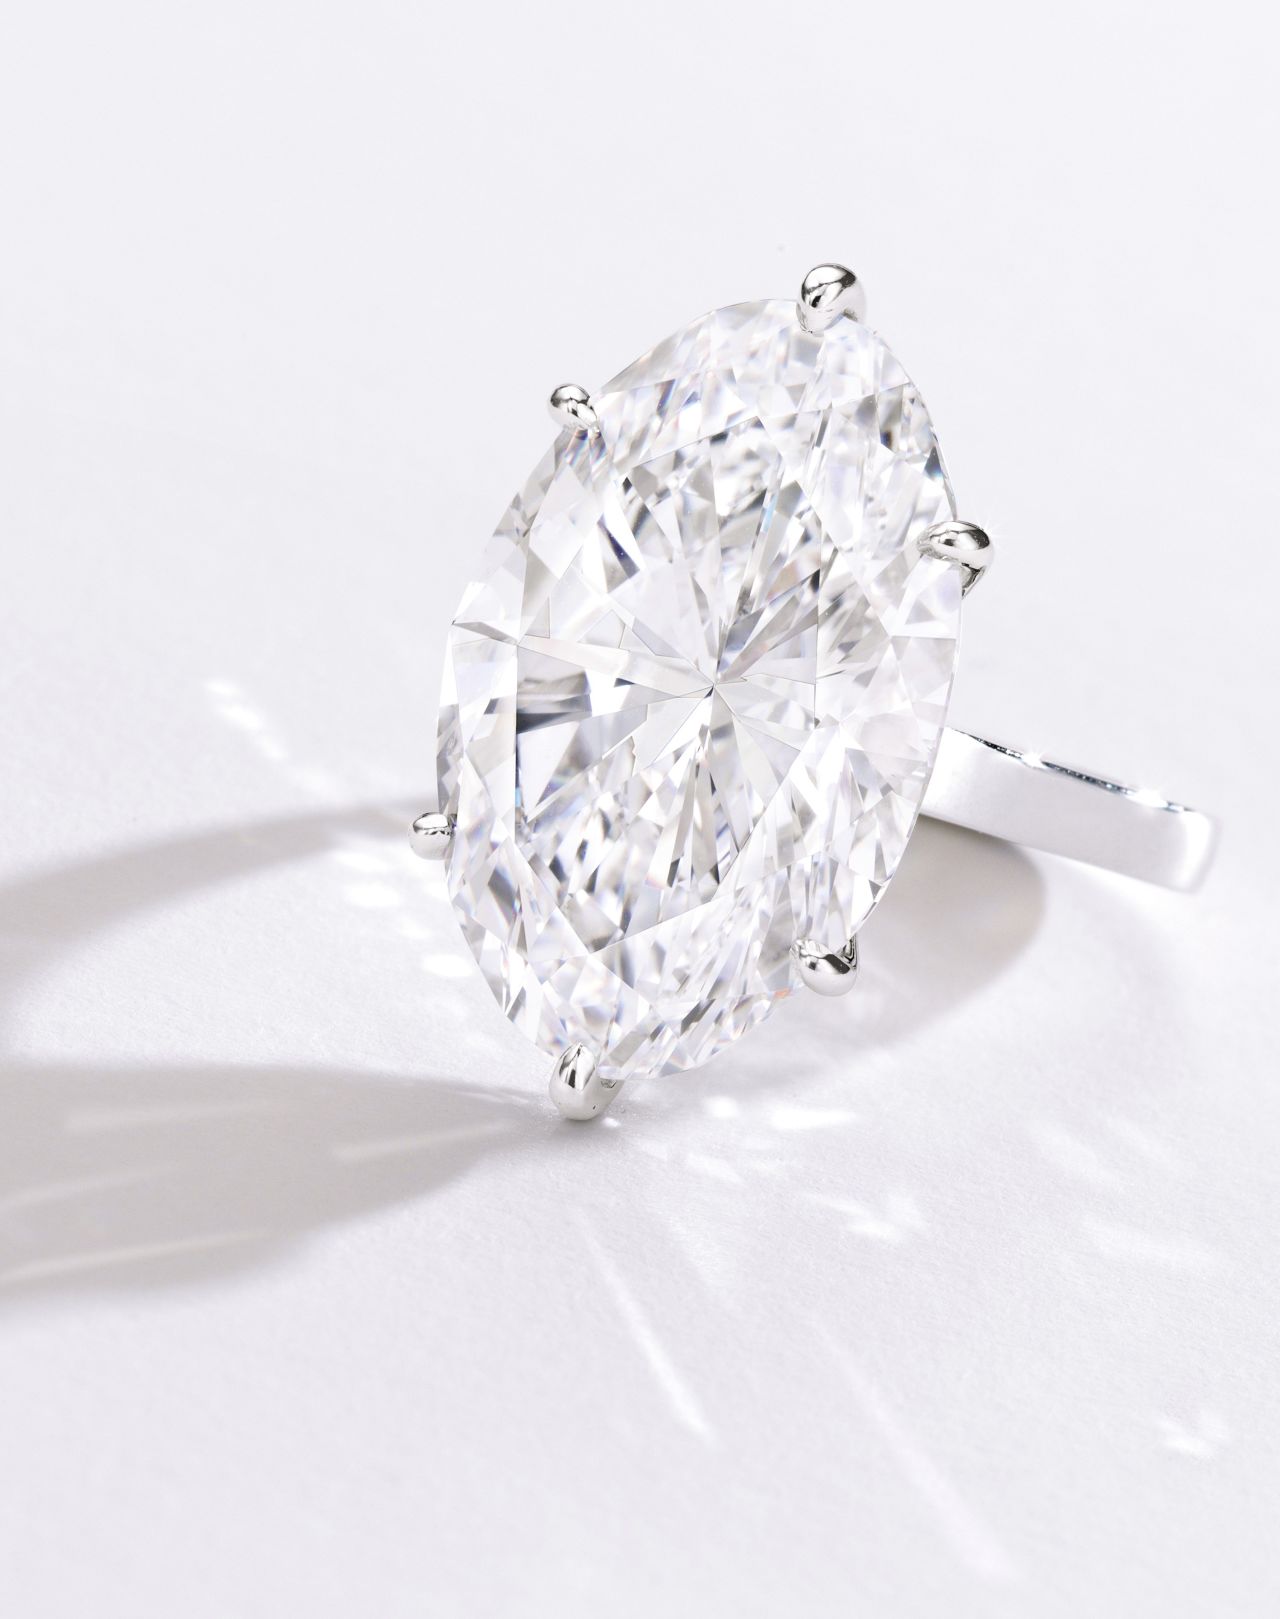 This oval-shaped 22.30 carat diamond ring sold to an online bidder for $3.3 million.